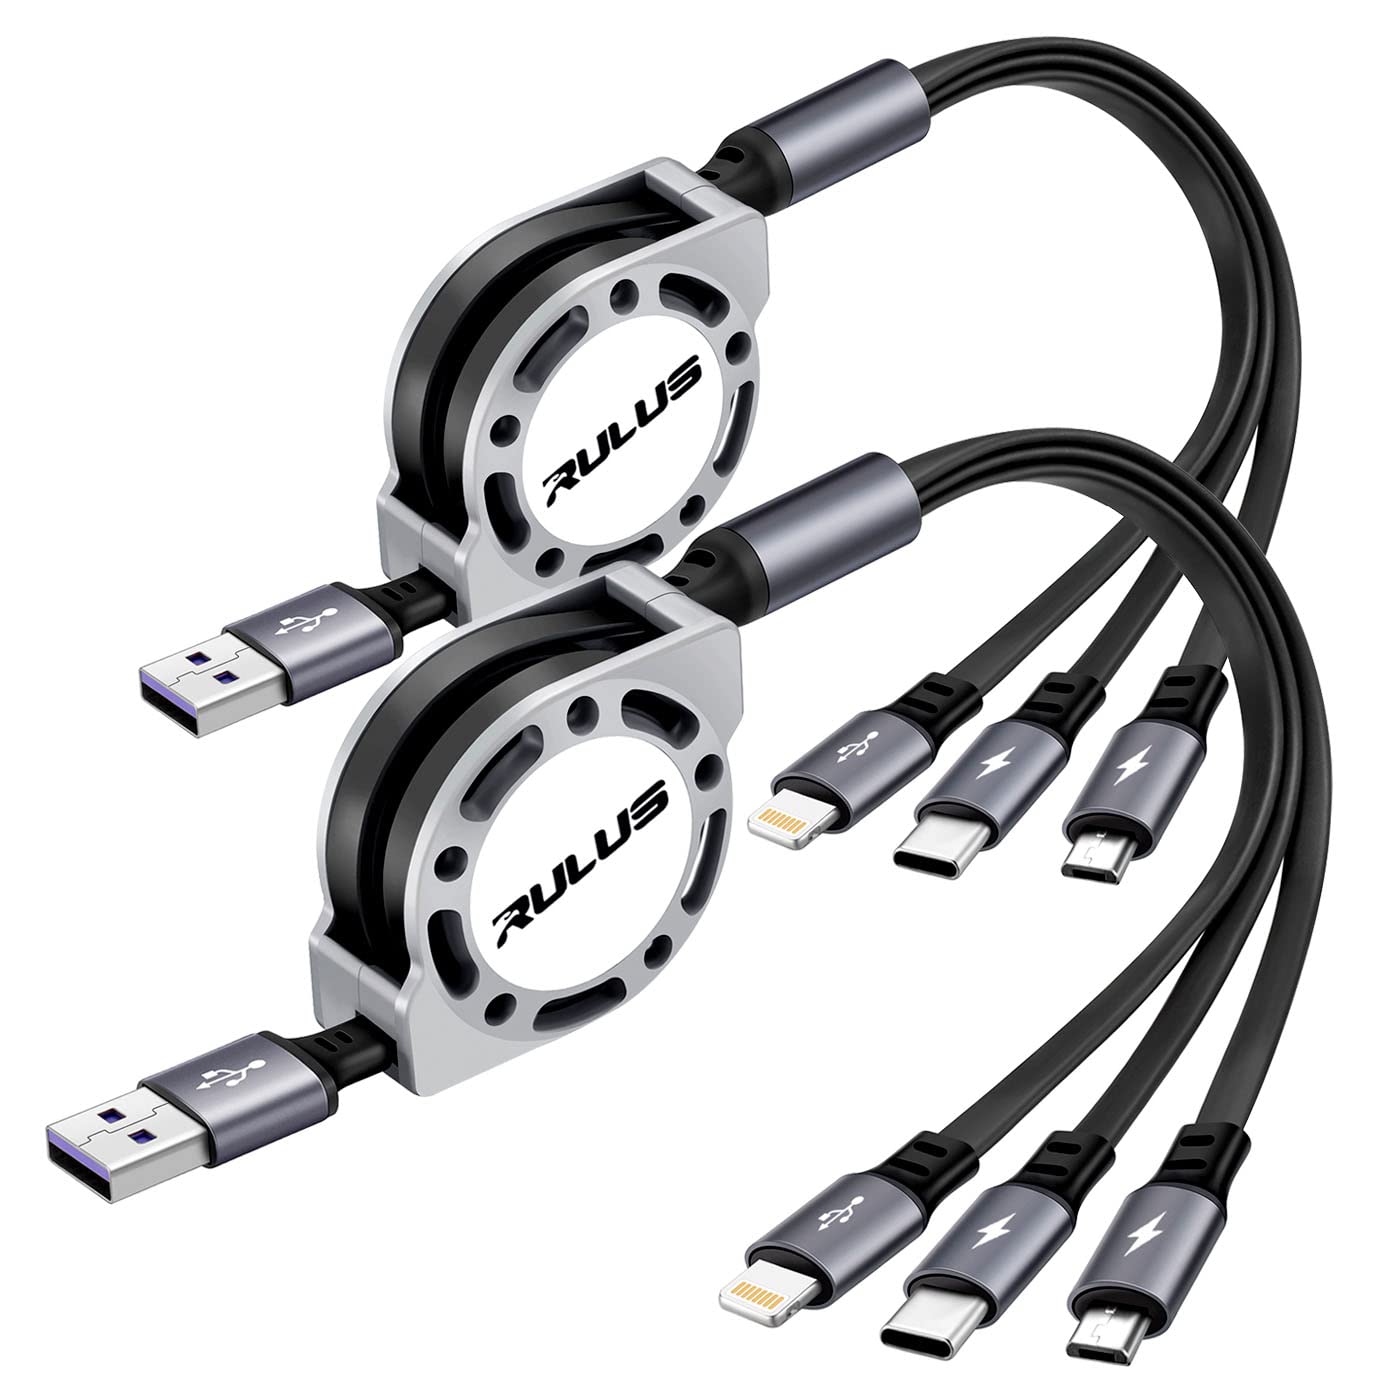 Multi Charging Cable 2Pack 4Ft 3 in 1 Retractable Fast [...]